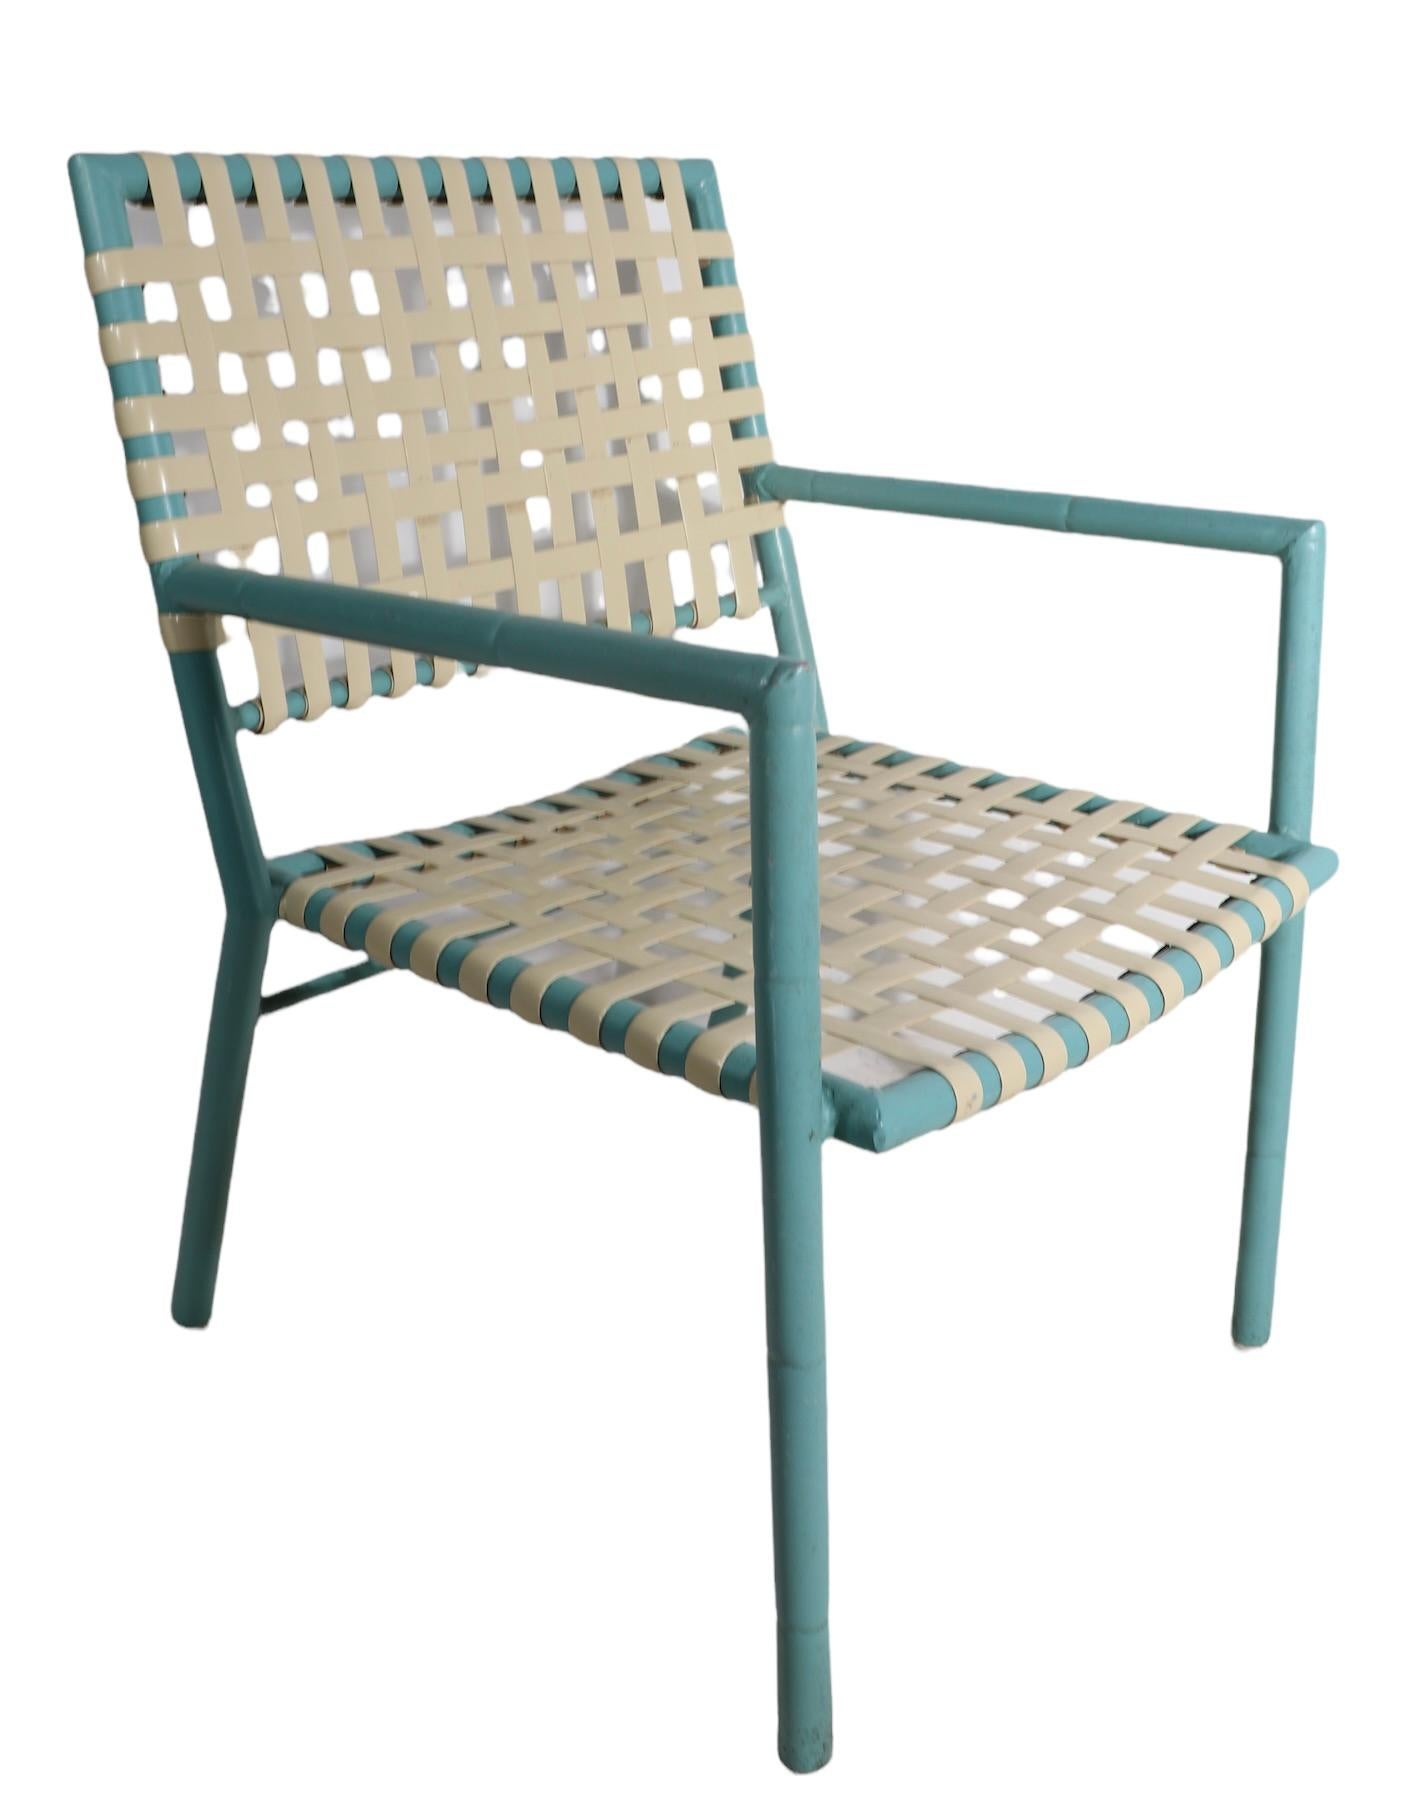 Mid-Century Modern Pr. Faux Bamboo Poolside Garden Patio Lounge Chairs by Hauser ca. 1970's For Sale